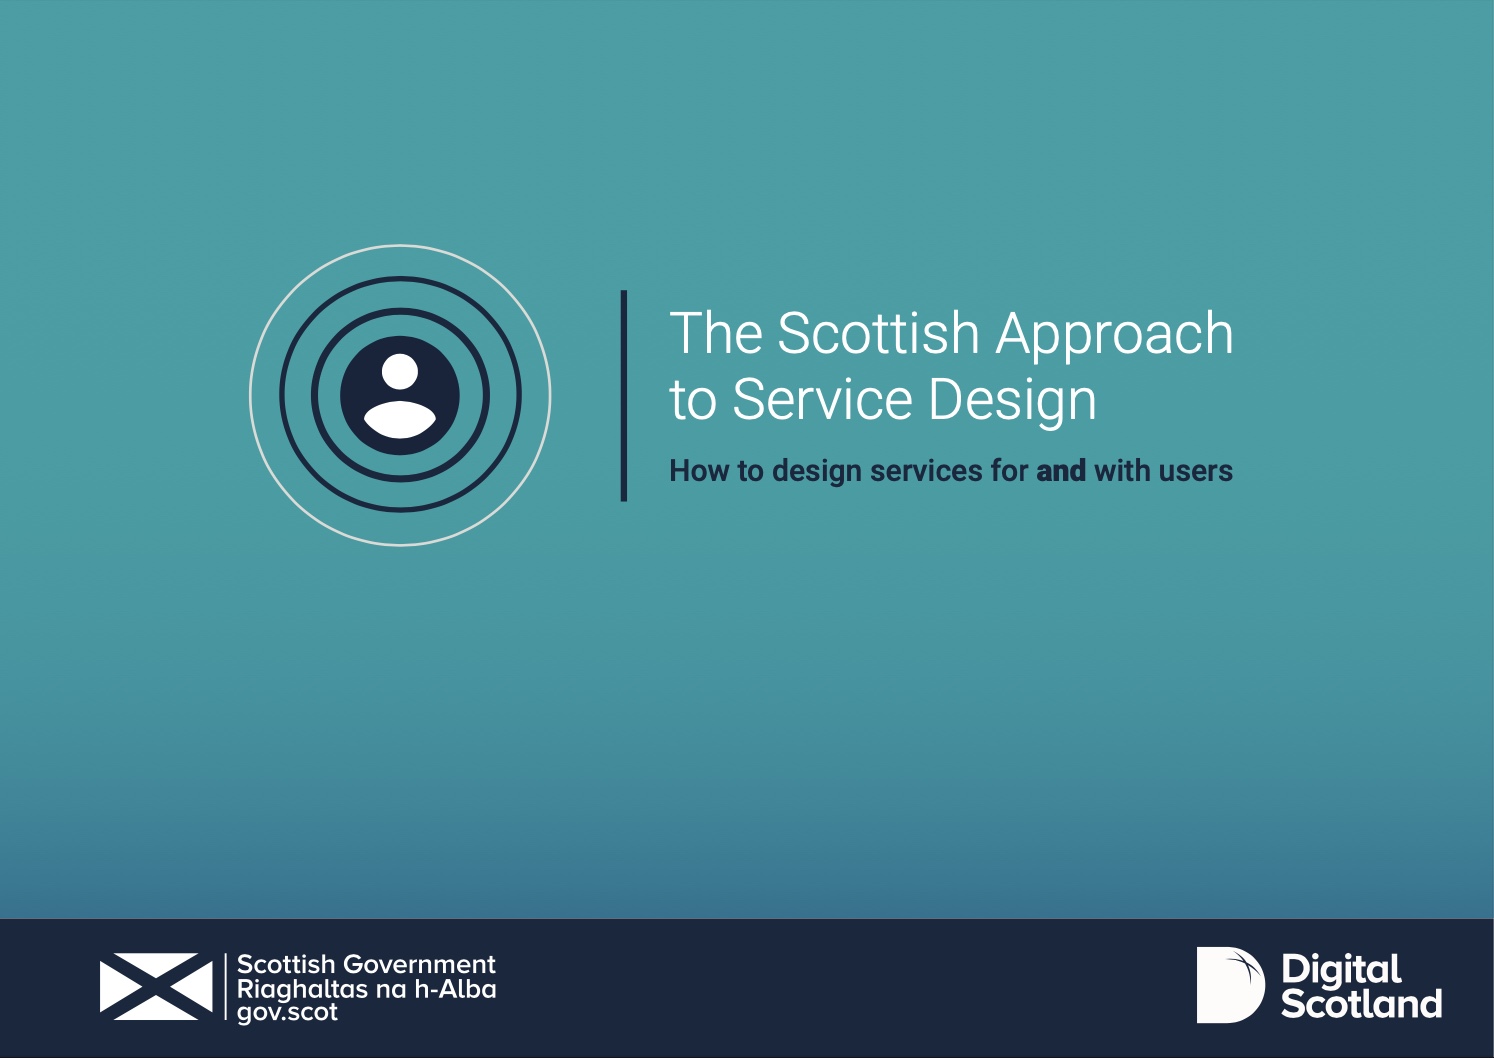 The Scottish Approach to Service Design